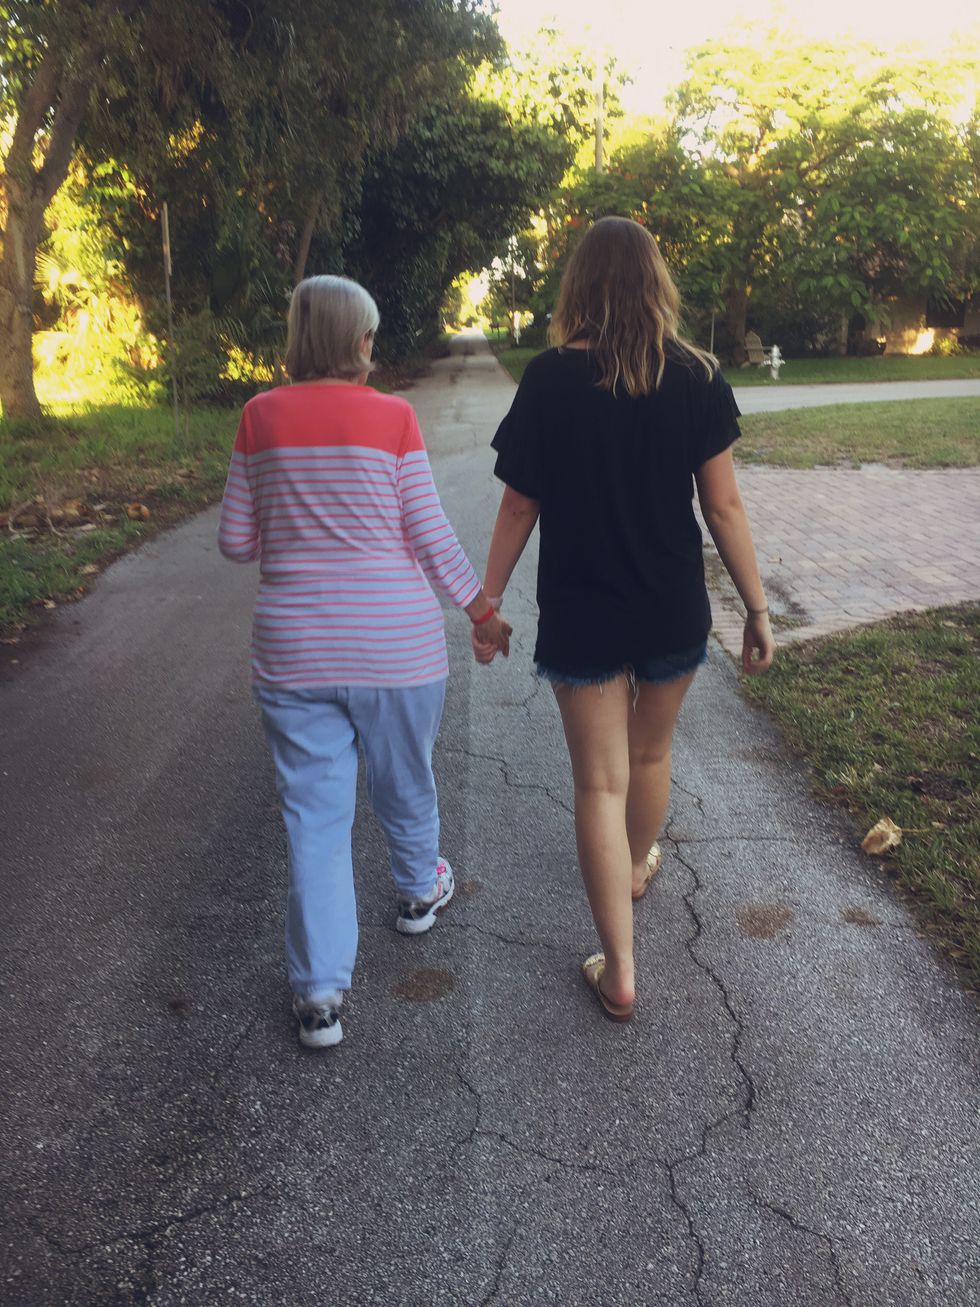 People With Alzheimer's Need Love Too